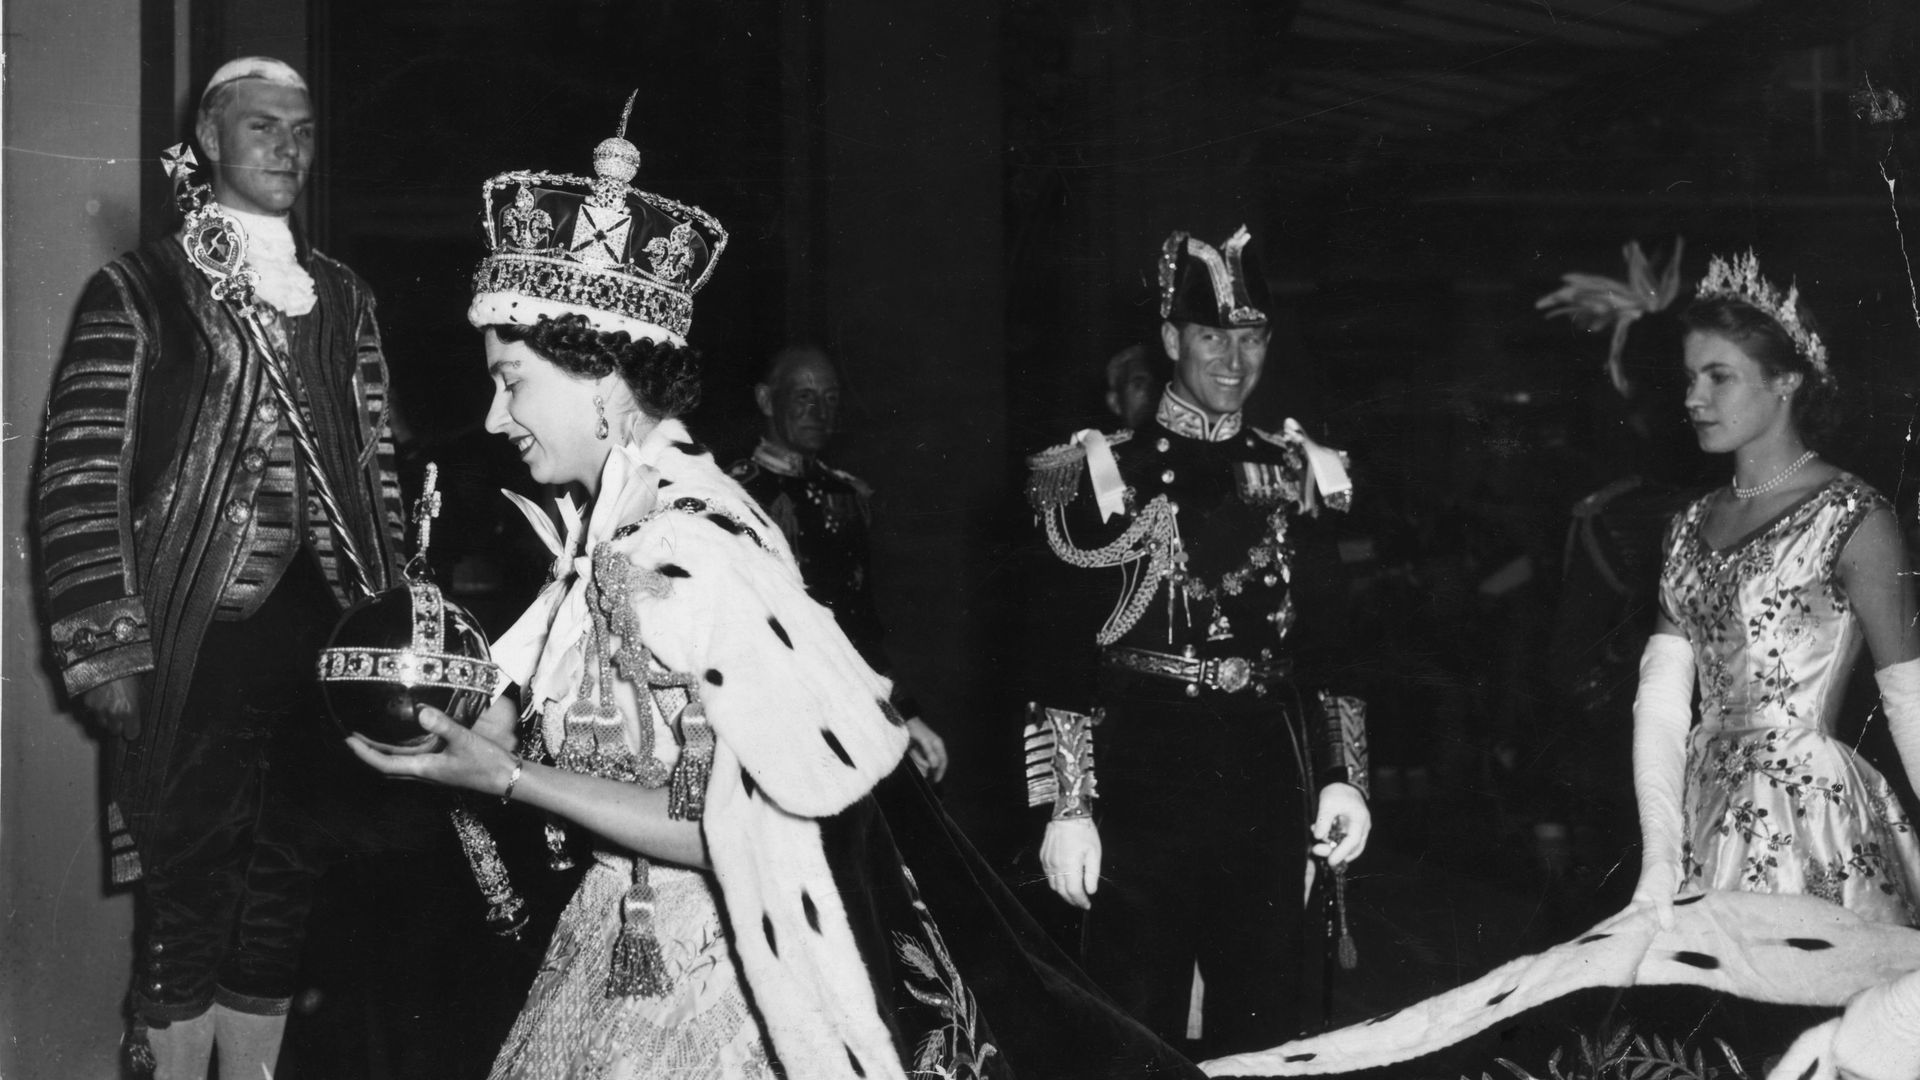 2nd June 1953:  Queen Elizabeth II, wearing the Imperial State crown and carrying the Orb and Sceptre, returns to Buckingham Palace from Westminster Abbey, London, following her Coronation.  (Photo by Topical Press Agency/Getty Images)